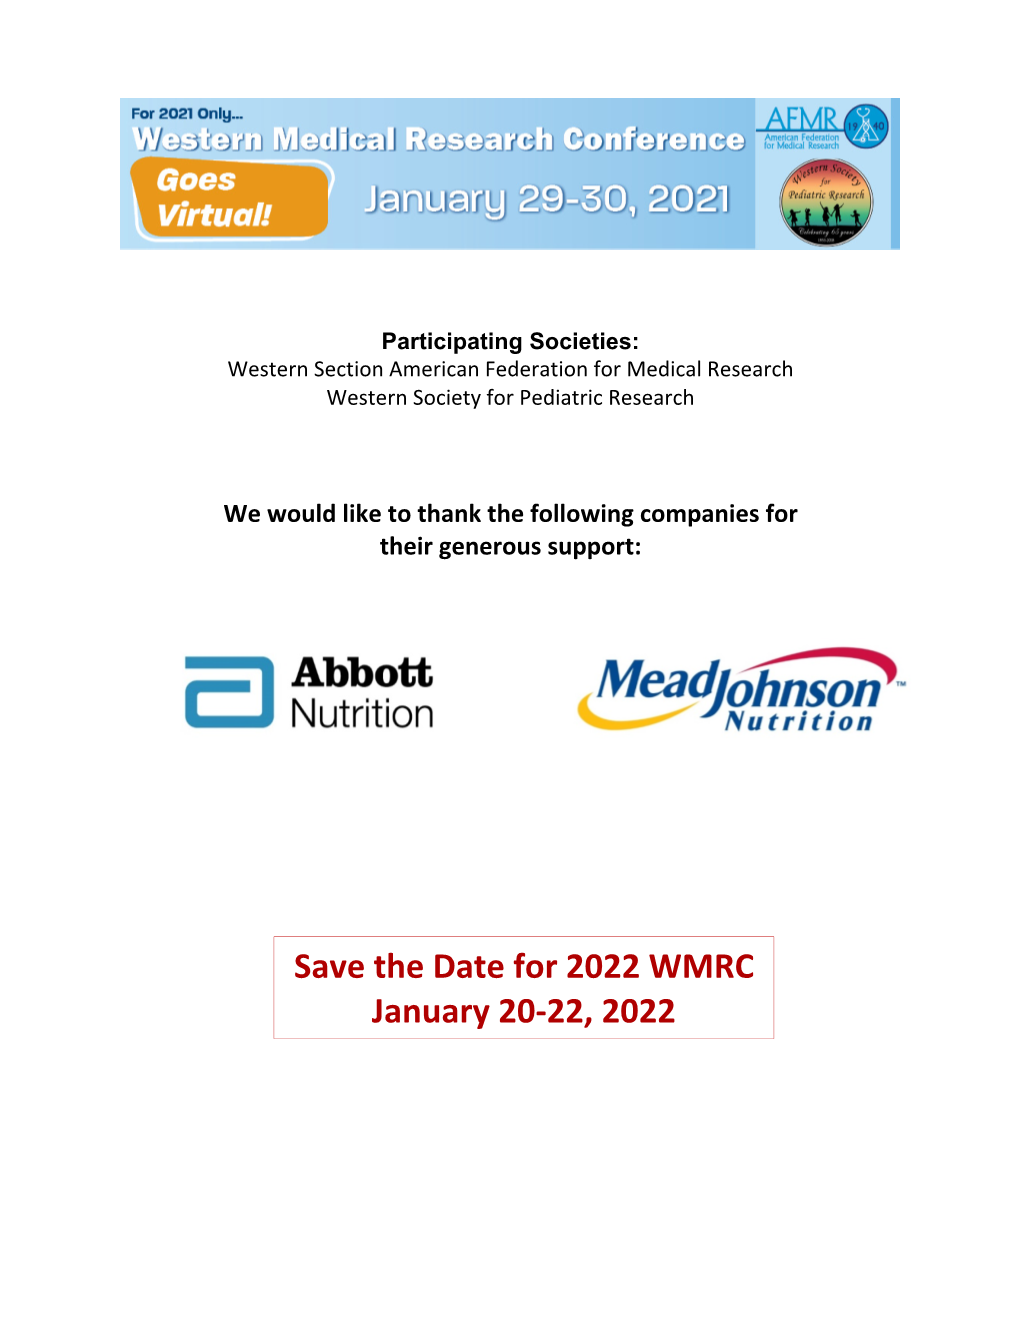 Save the Date for 2022 WMRC January 20-22, 2022